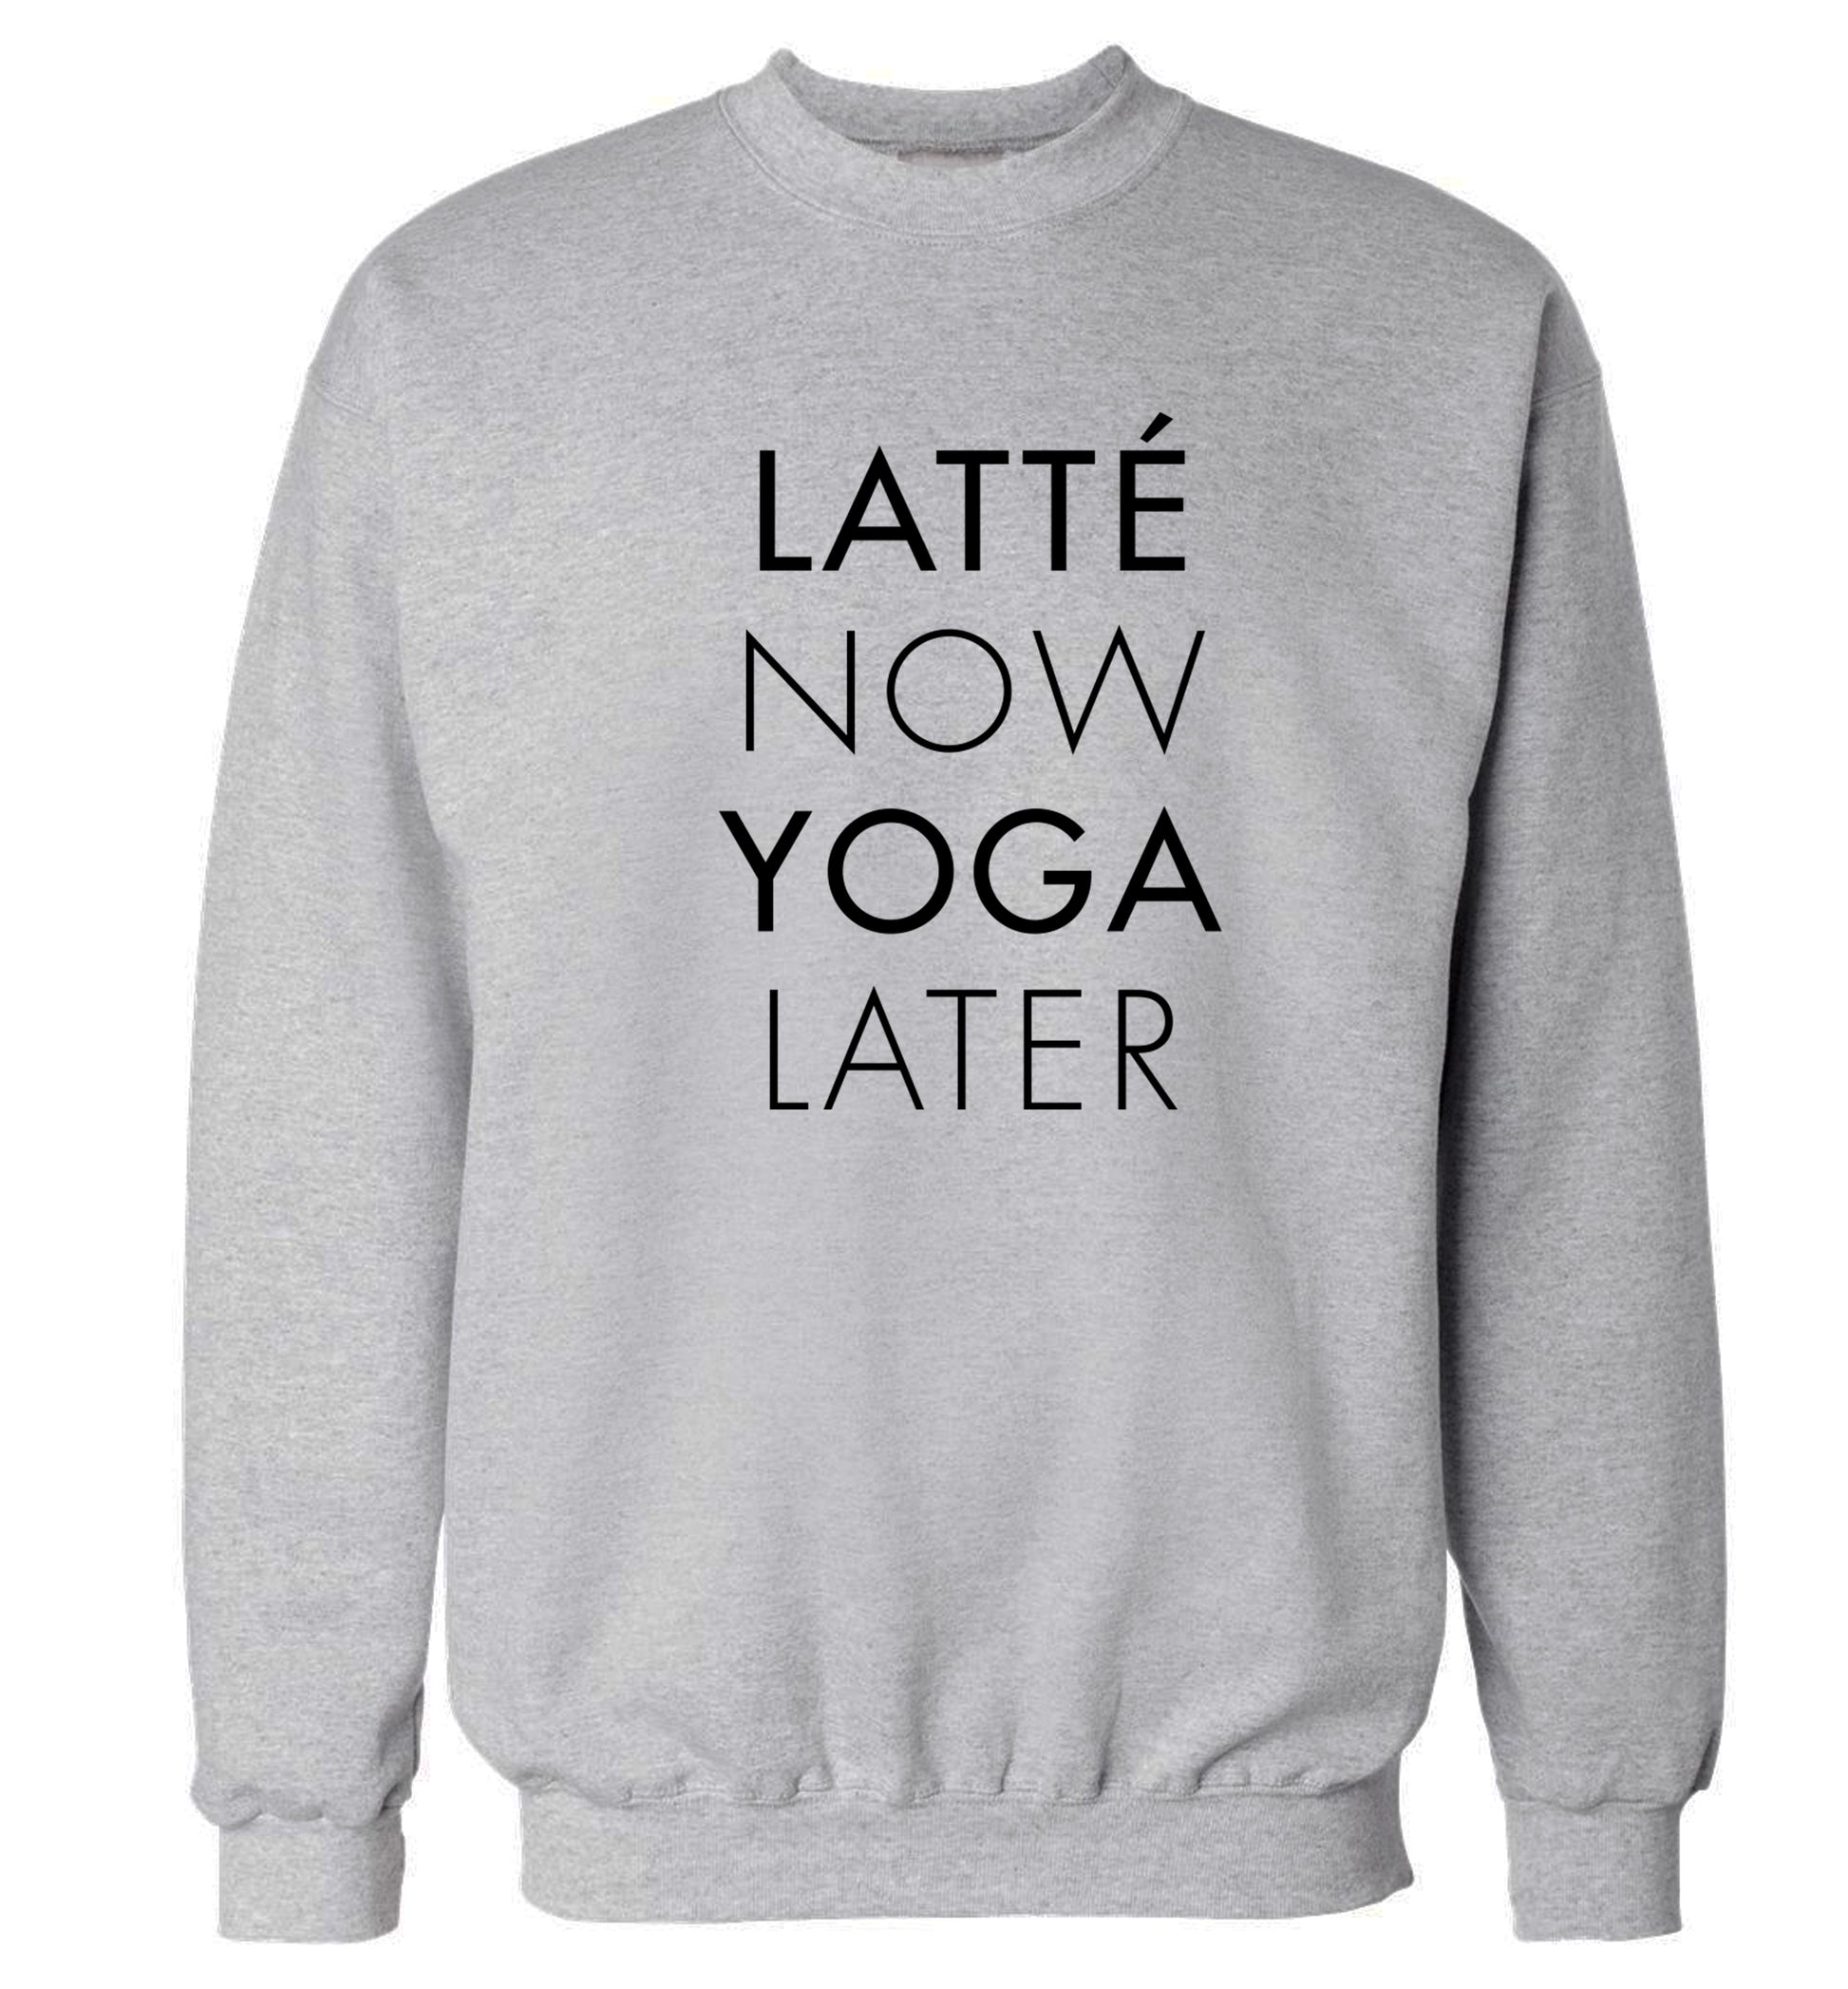 Latte now yoga later Adult's unisex grey Sweater 2XL